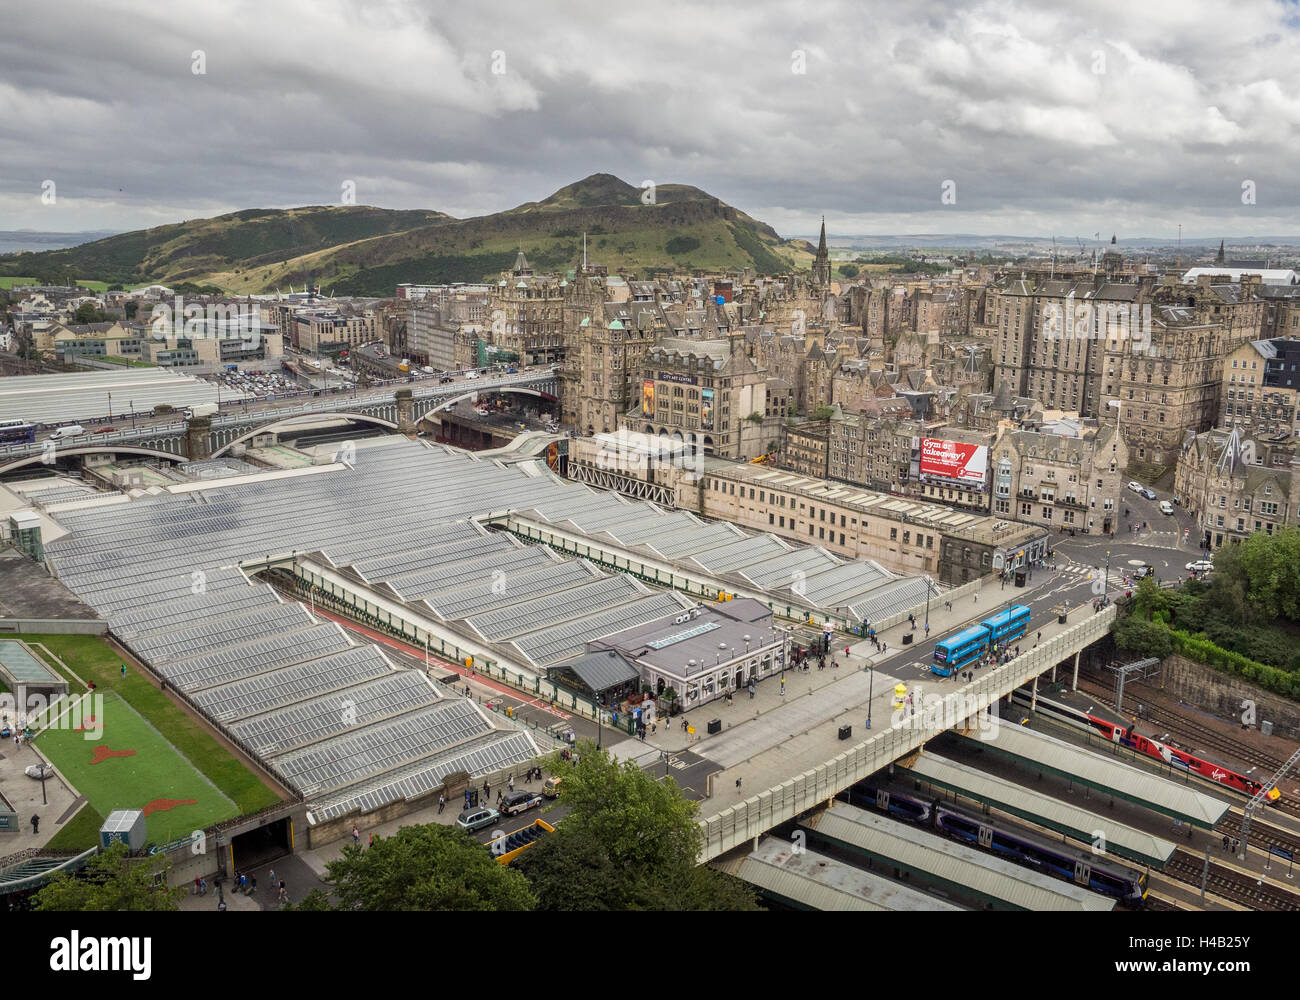 Edinburgh, Scotland -  31 August 2016 : Panoramic view of the roof of the Edinburgh Waverley Train Station as seen from above Stock Photo